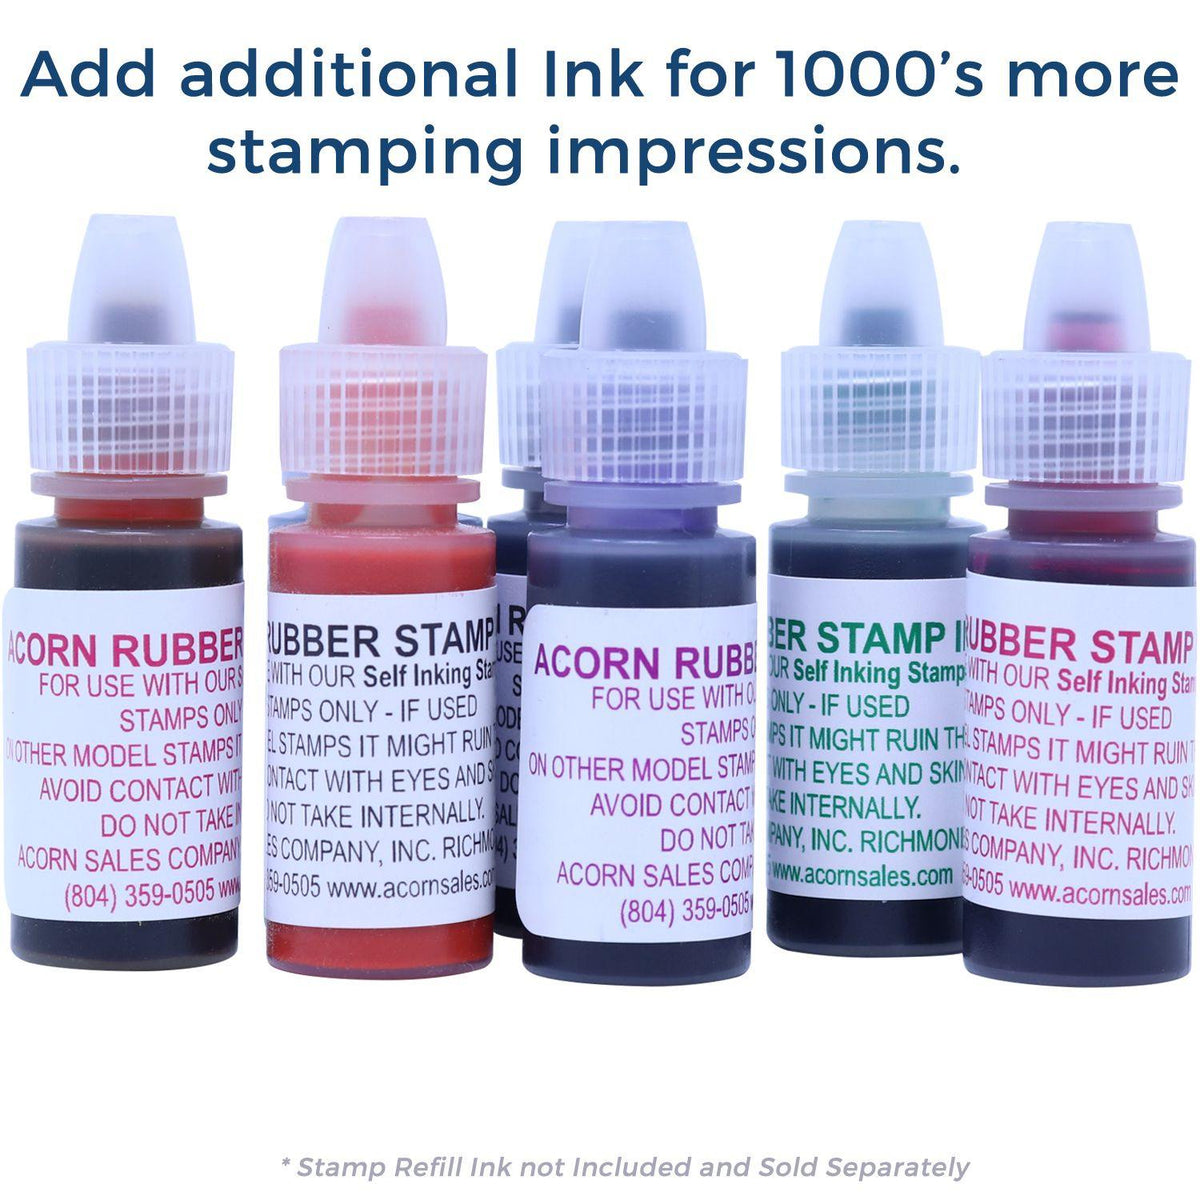 Refill Inks for Large Pre-Inked Printed Matter Stamp Available